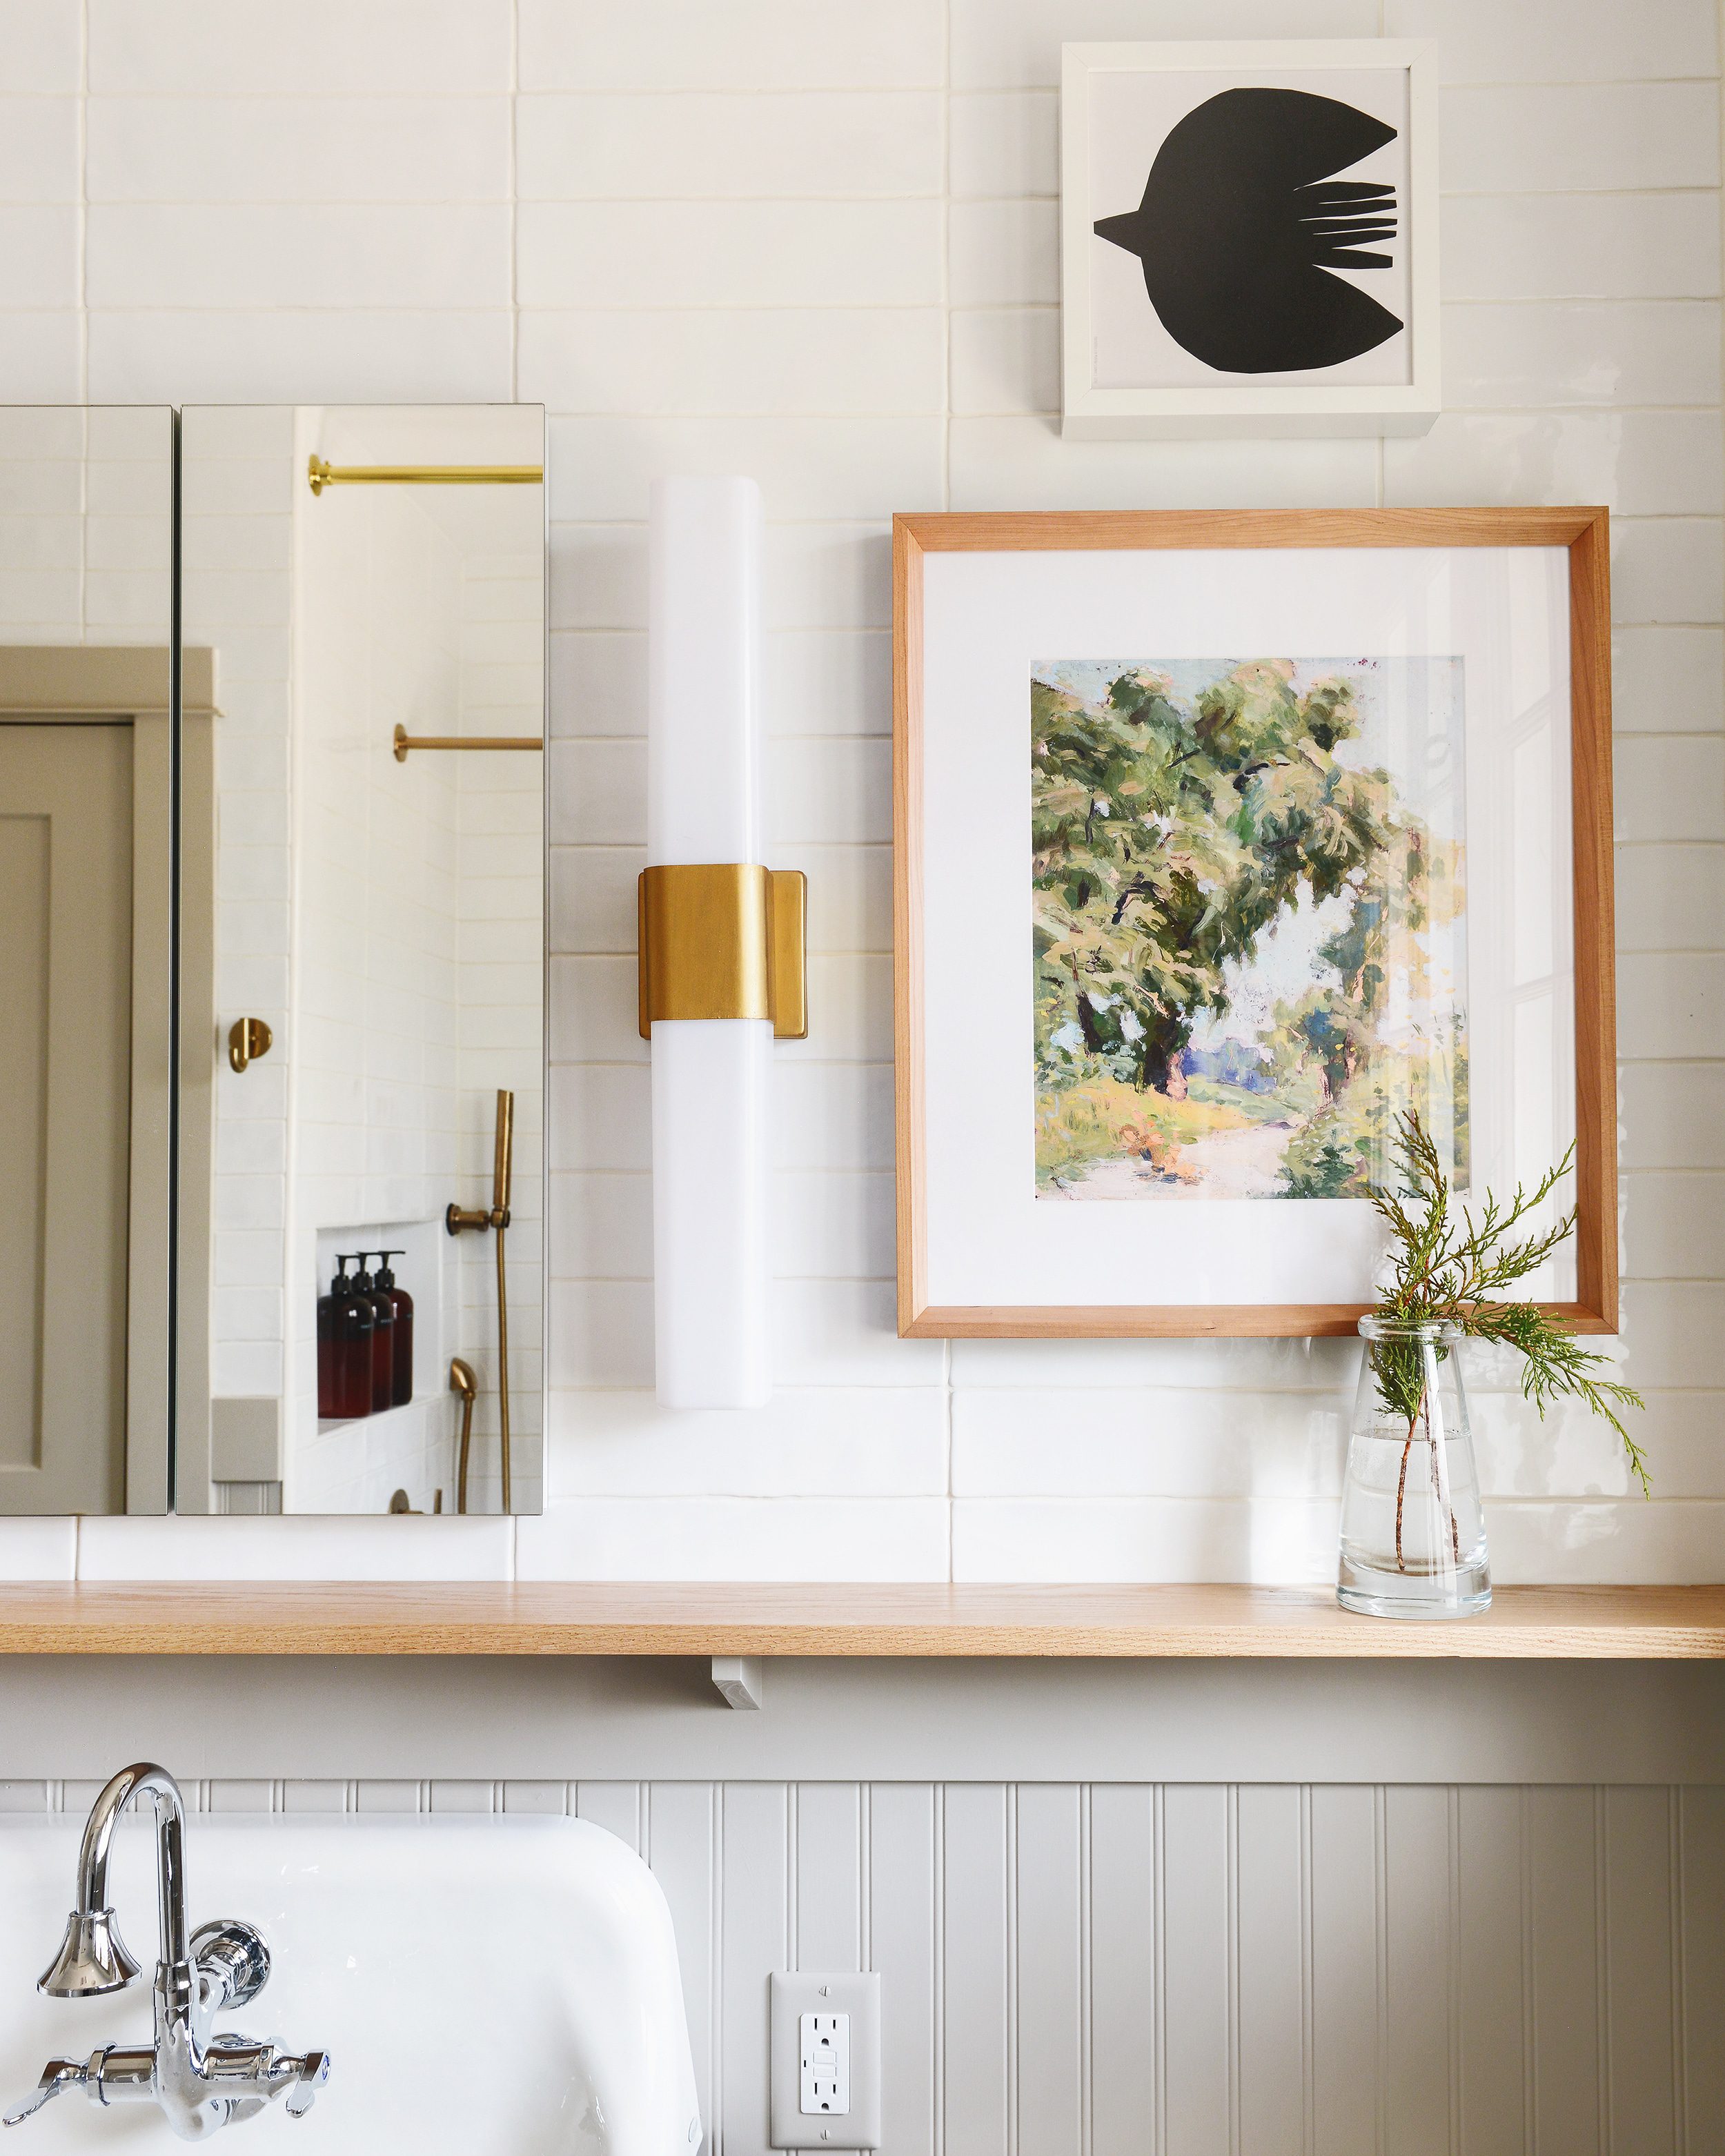 Greige bathroom with a framed print of a bird and tree | round-up of 19 works of art that would look good in a bathroom, via Yellow Brick Home